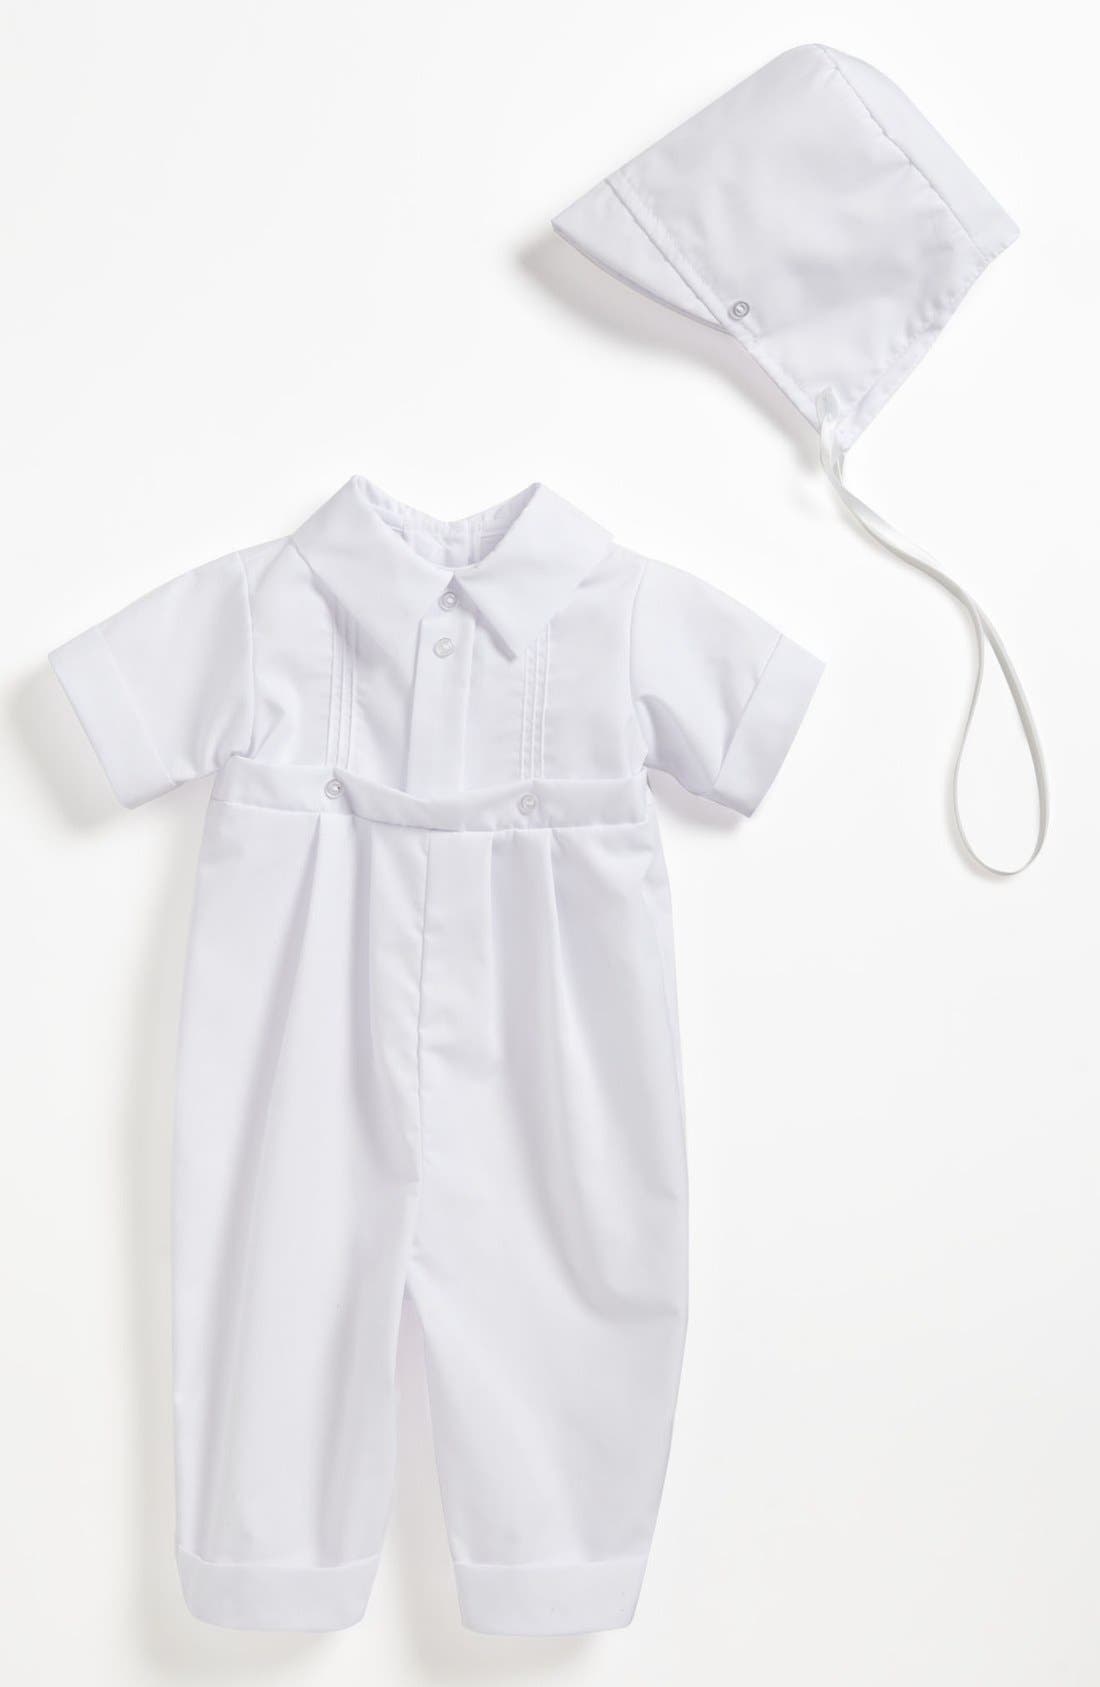 nordstrom baptism outfit